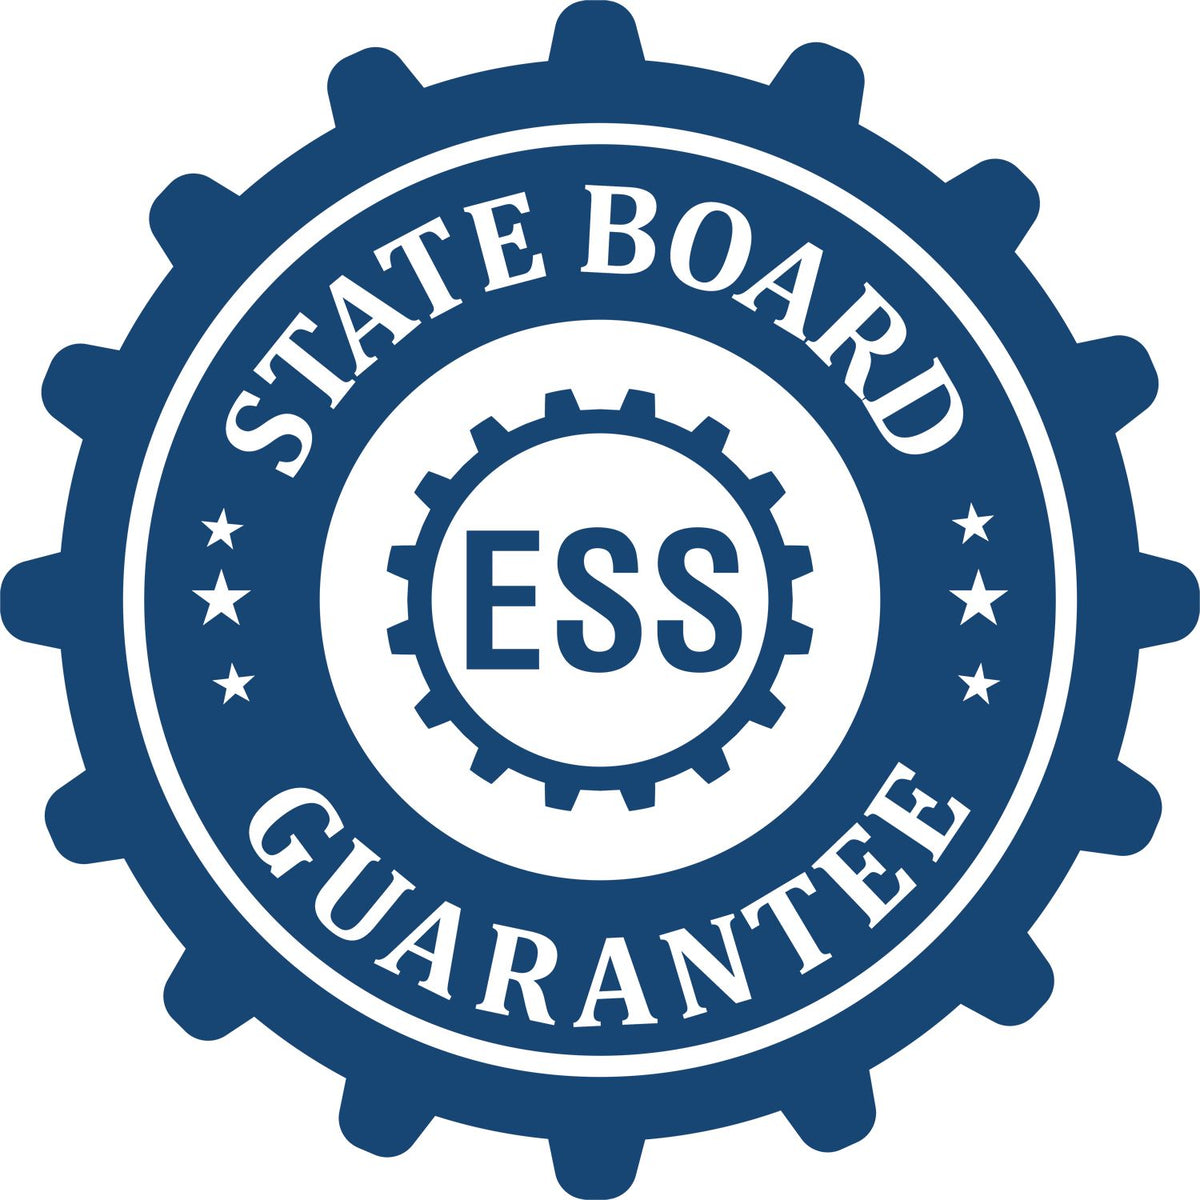 An emblem in a gear shape illustrating a state board guarantee for the Handheld Hawaii Land Surveyor Seal product.